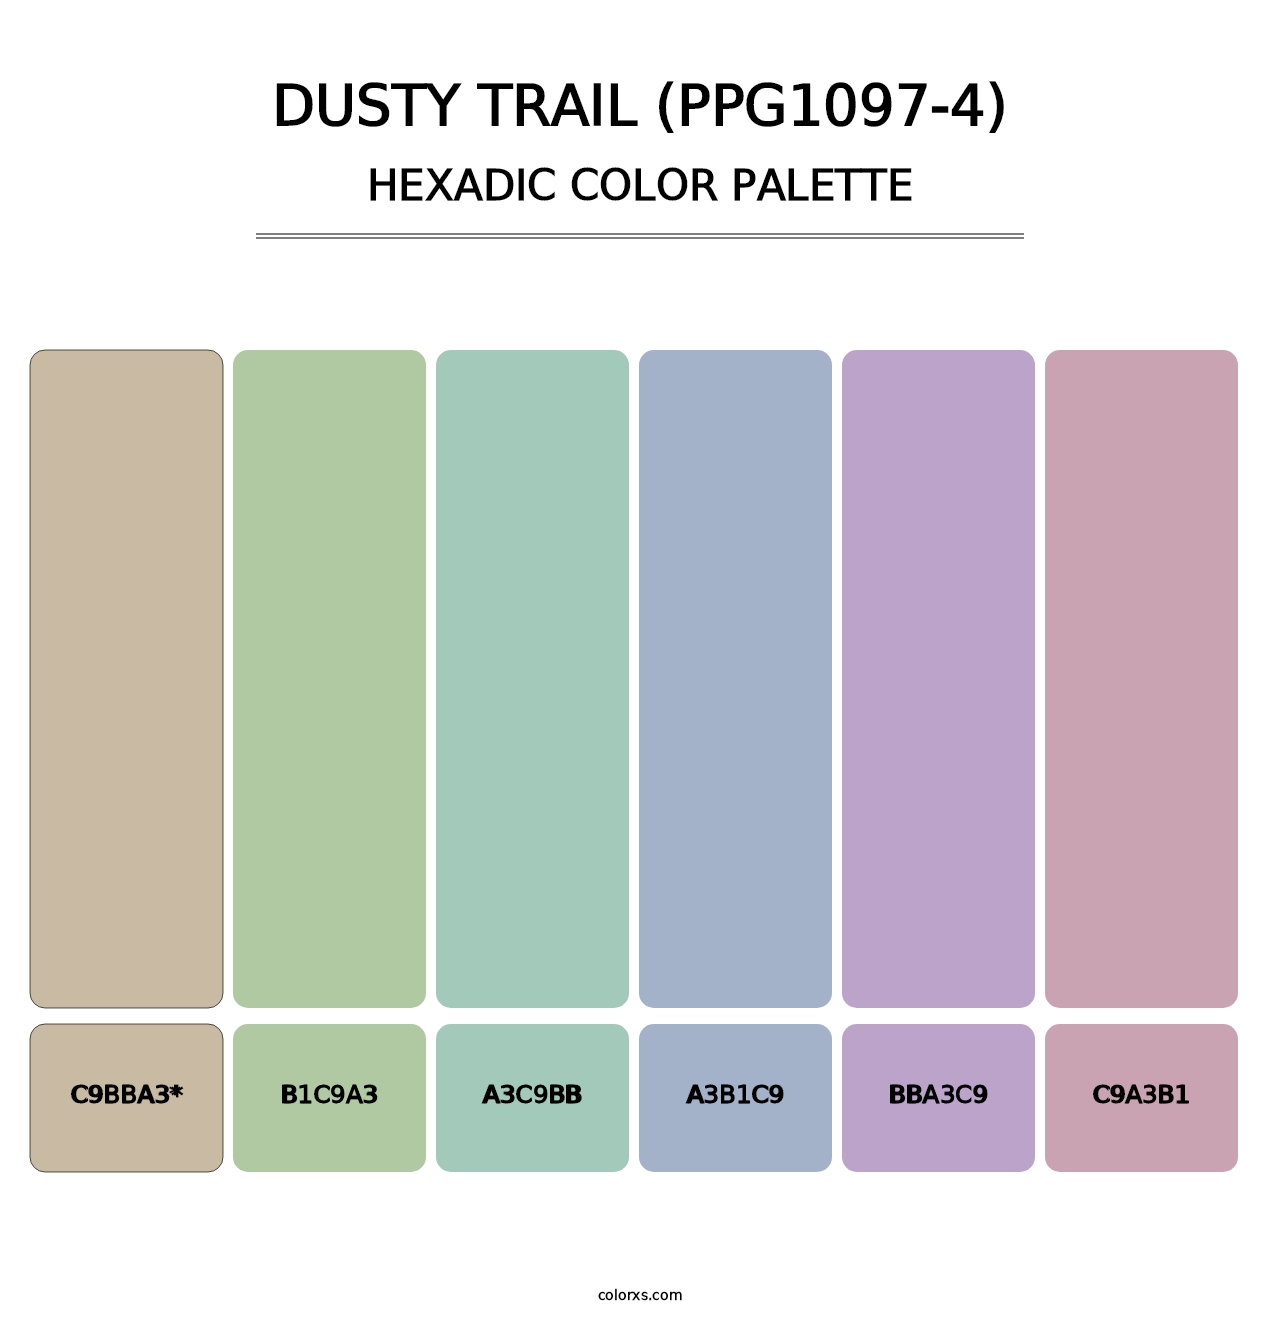 Dusty Trail (PPG1097-4) - Hexadic Color Palette